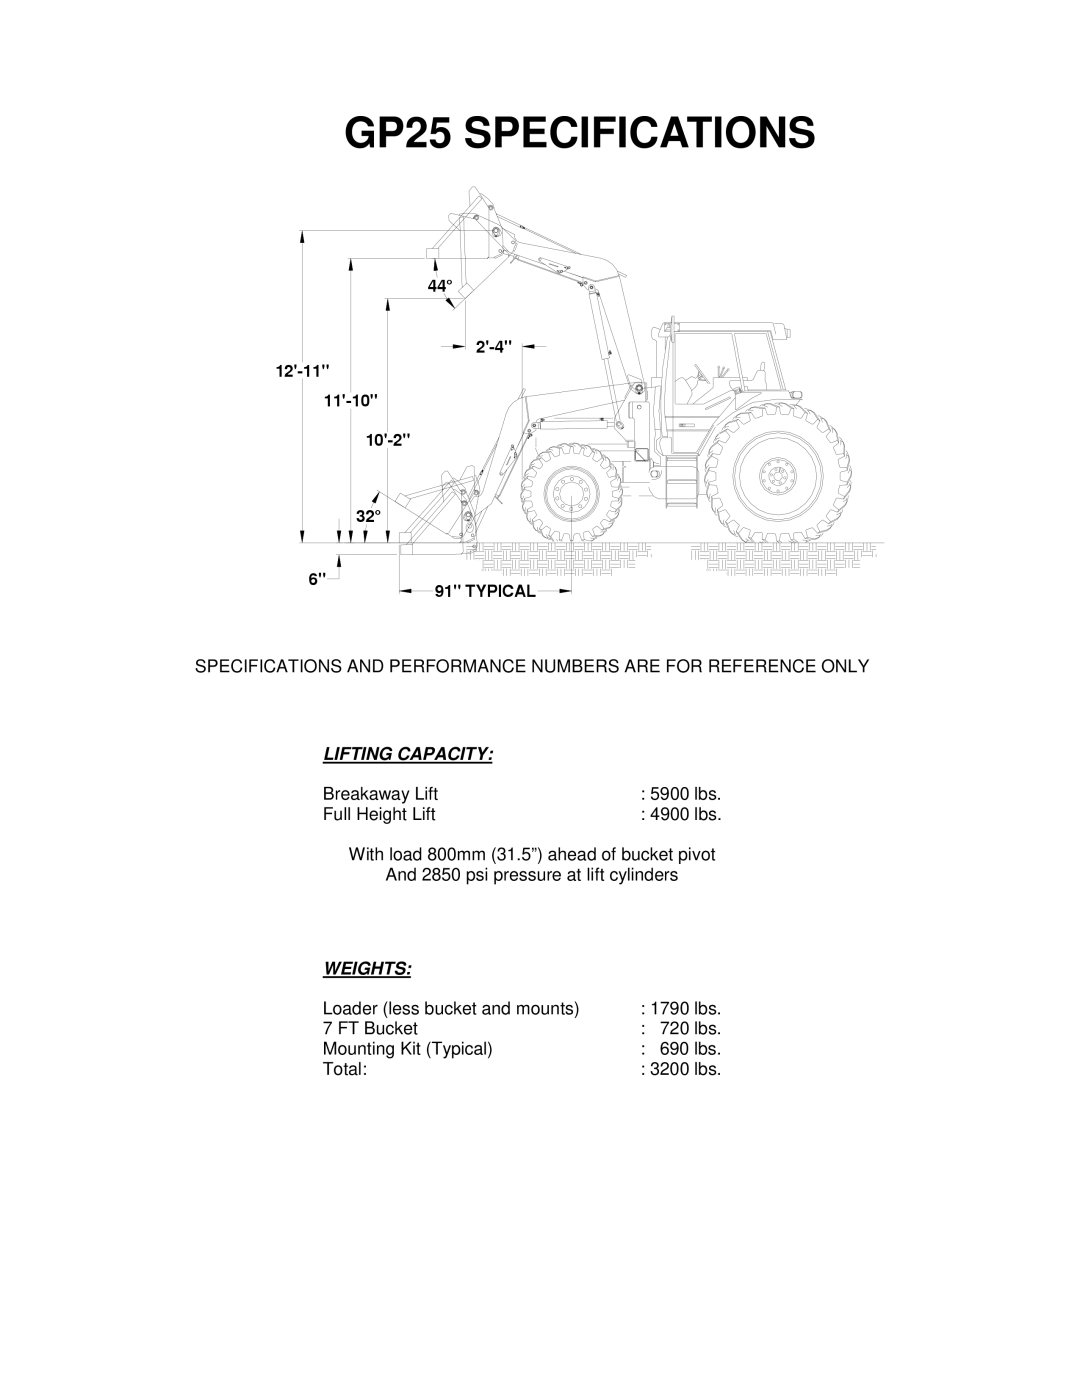 MK Sound owner manual GP25 SPECIFICATIONS, Lifting Capacity, Weights 